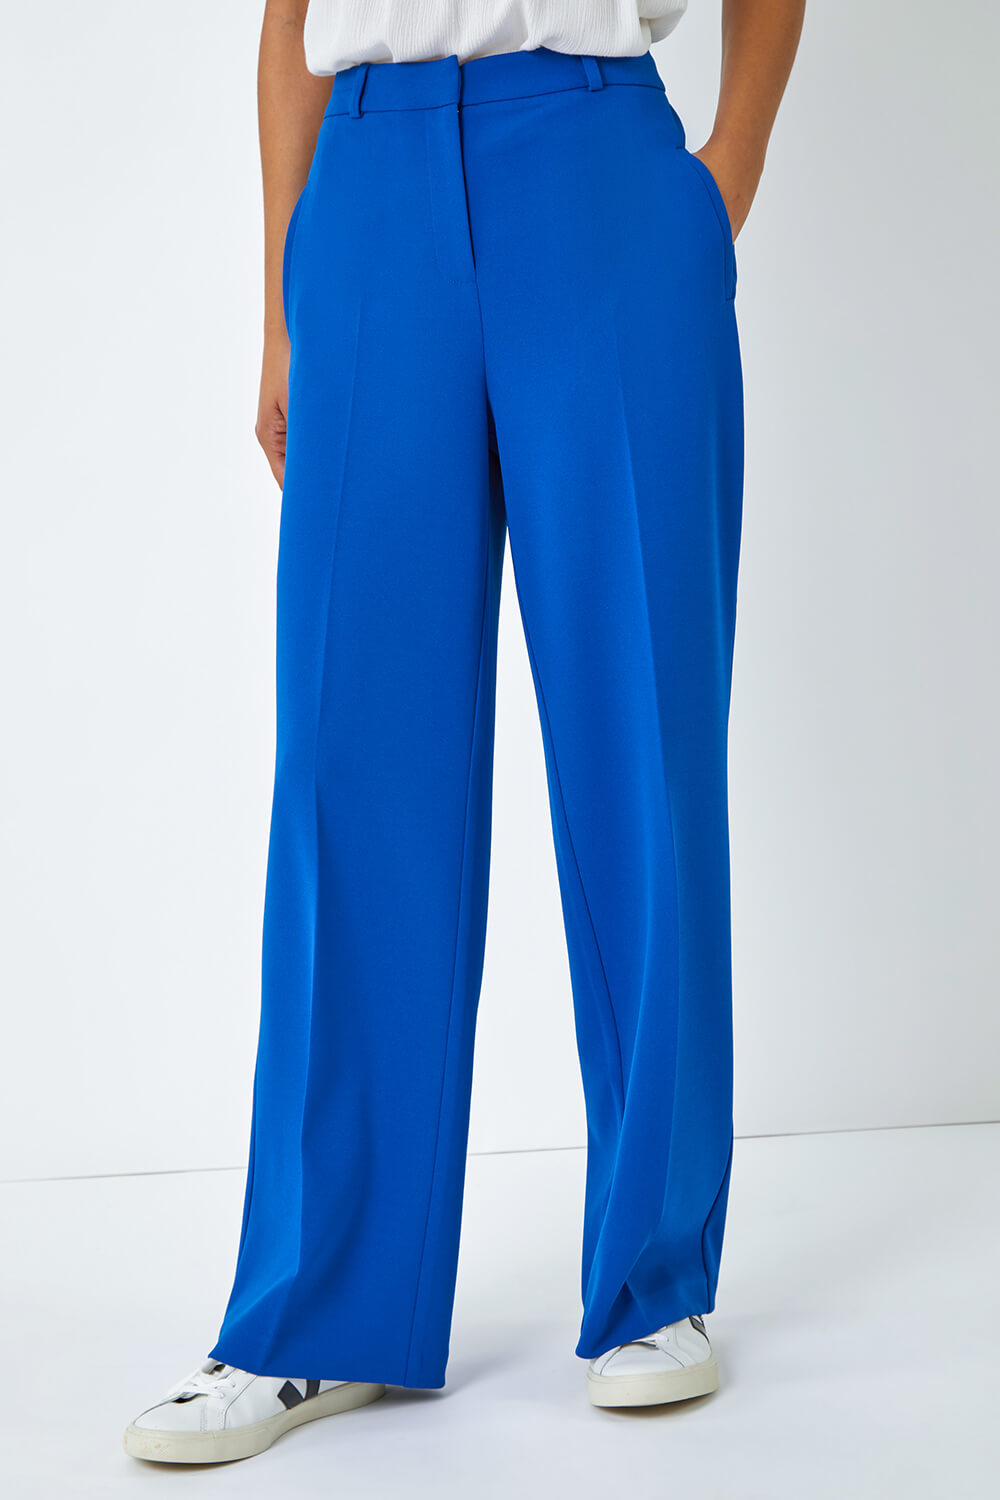 Royal Blue Wide Leg Premium Stretch Trousers, Image 5 of 5